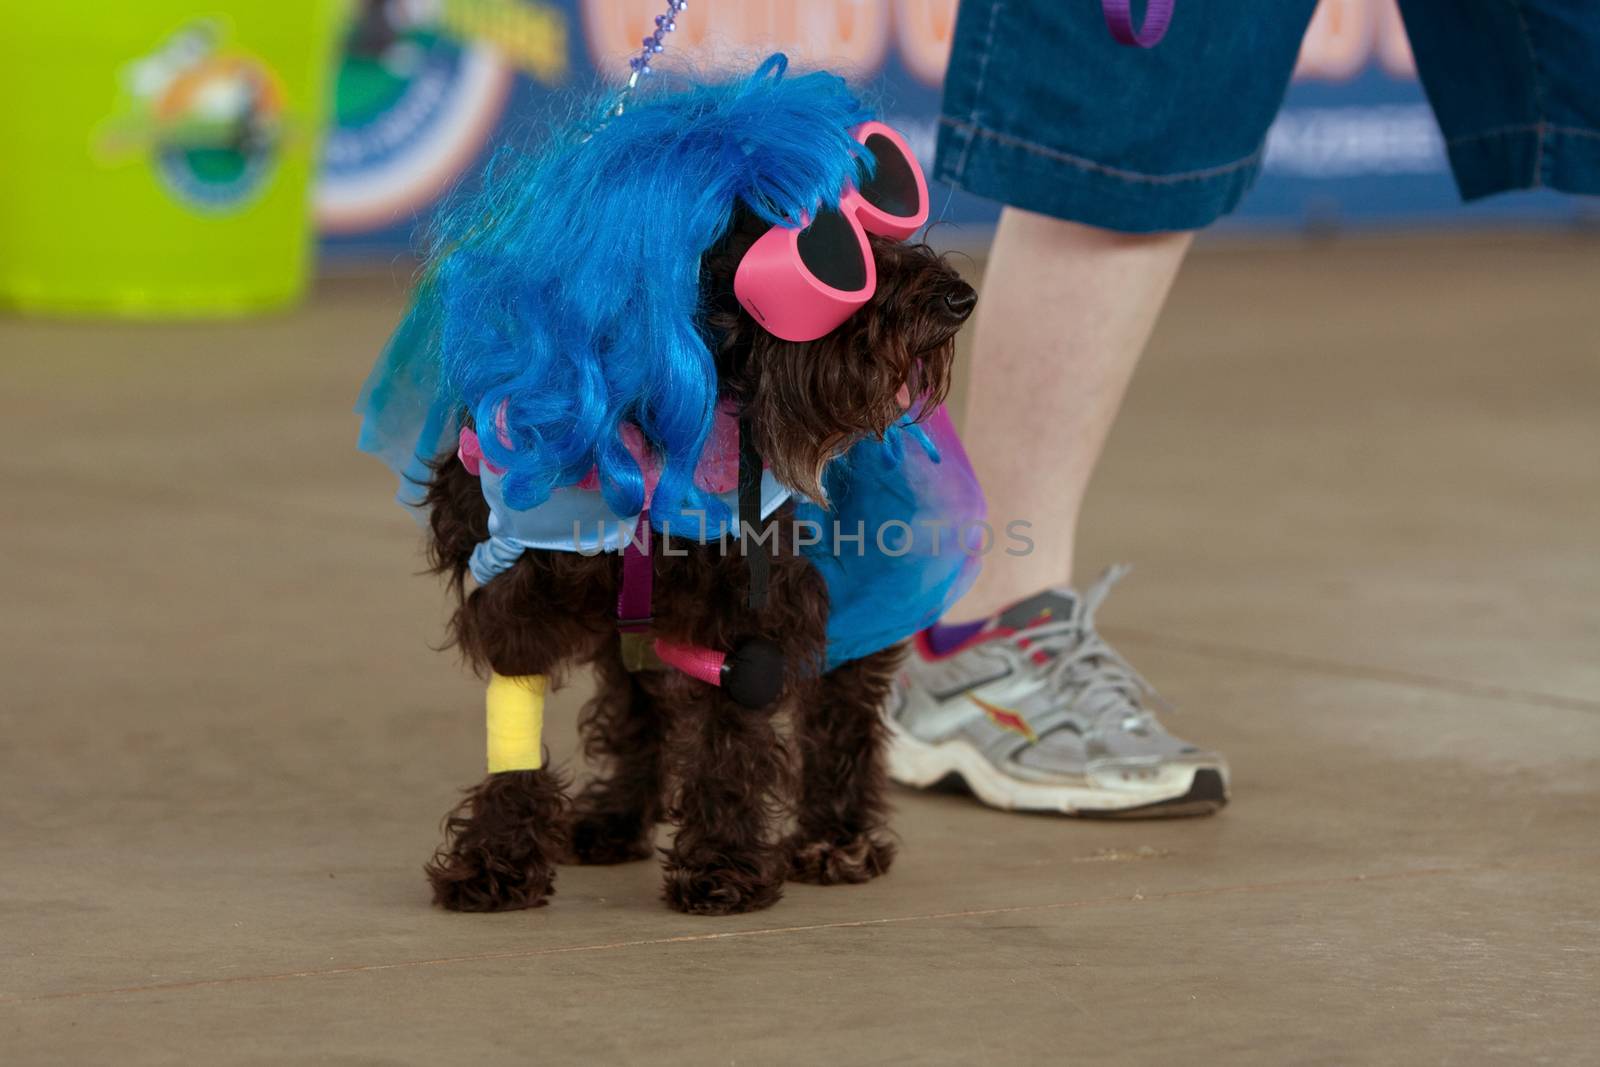 McDonough, GA, USA - May 10, 2014:  A dog is dressed in a Lady Gaga costume at the annual Dog Days of McDonough festival.